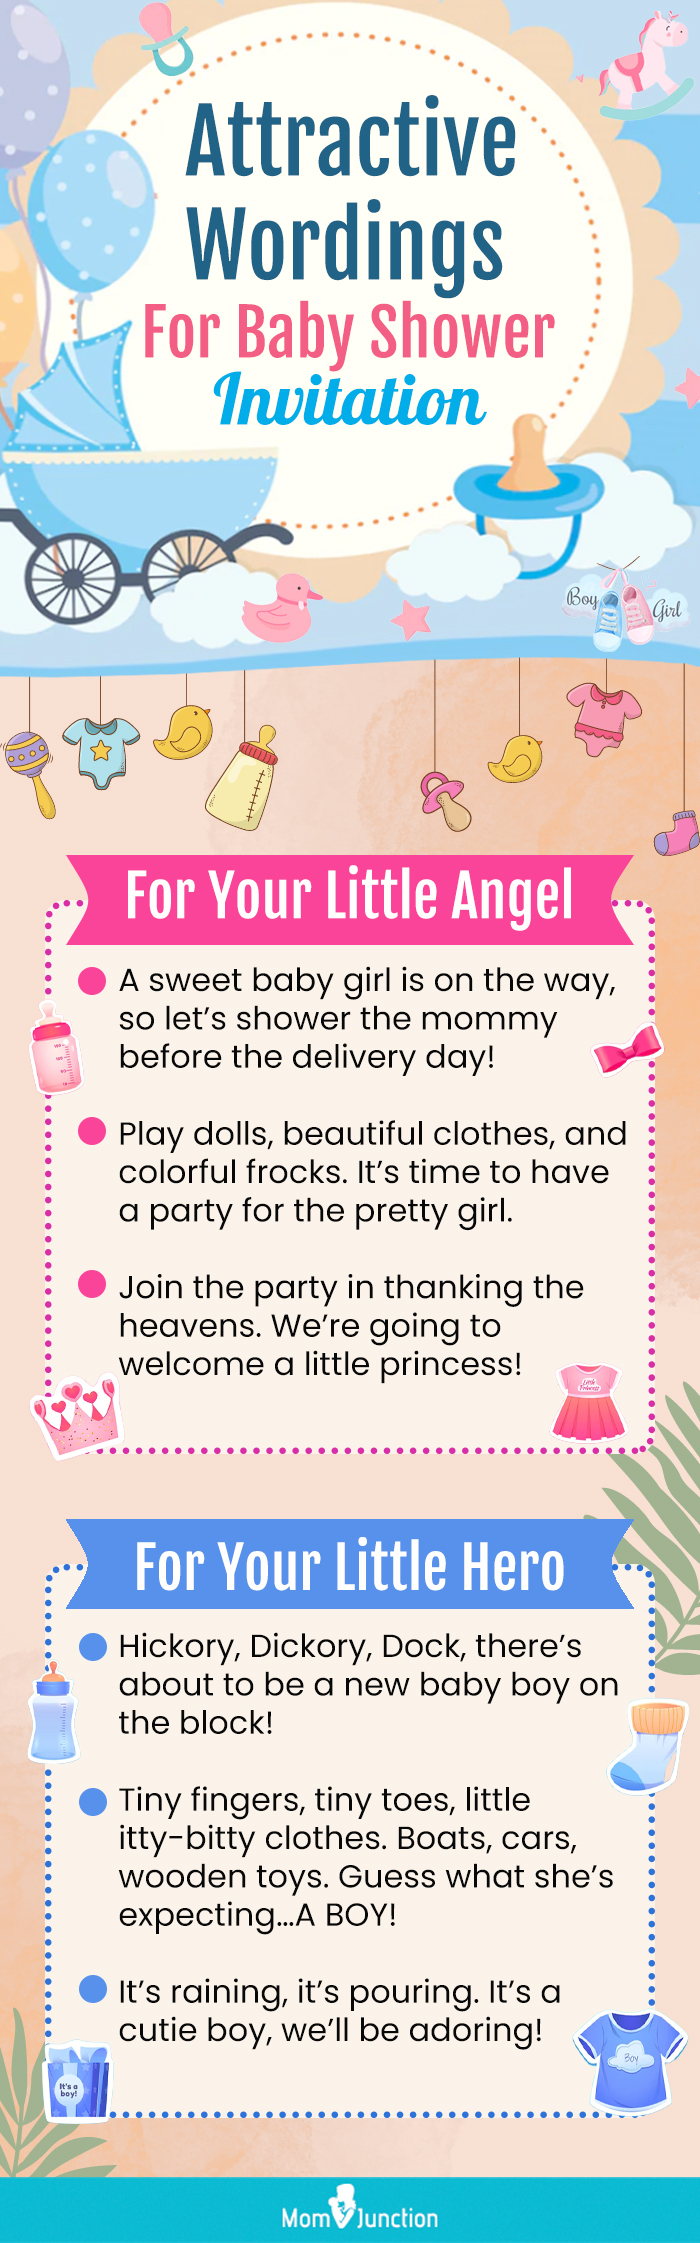 Attractive Wordings For Baby Shower Invitation 